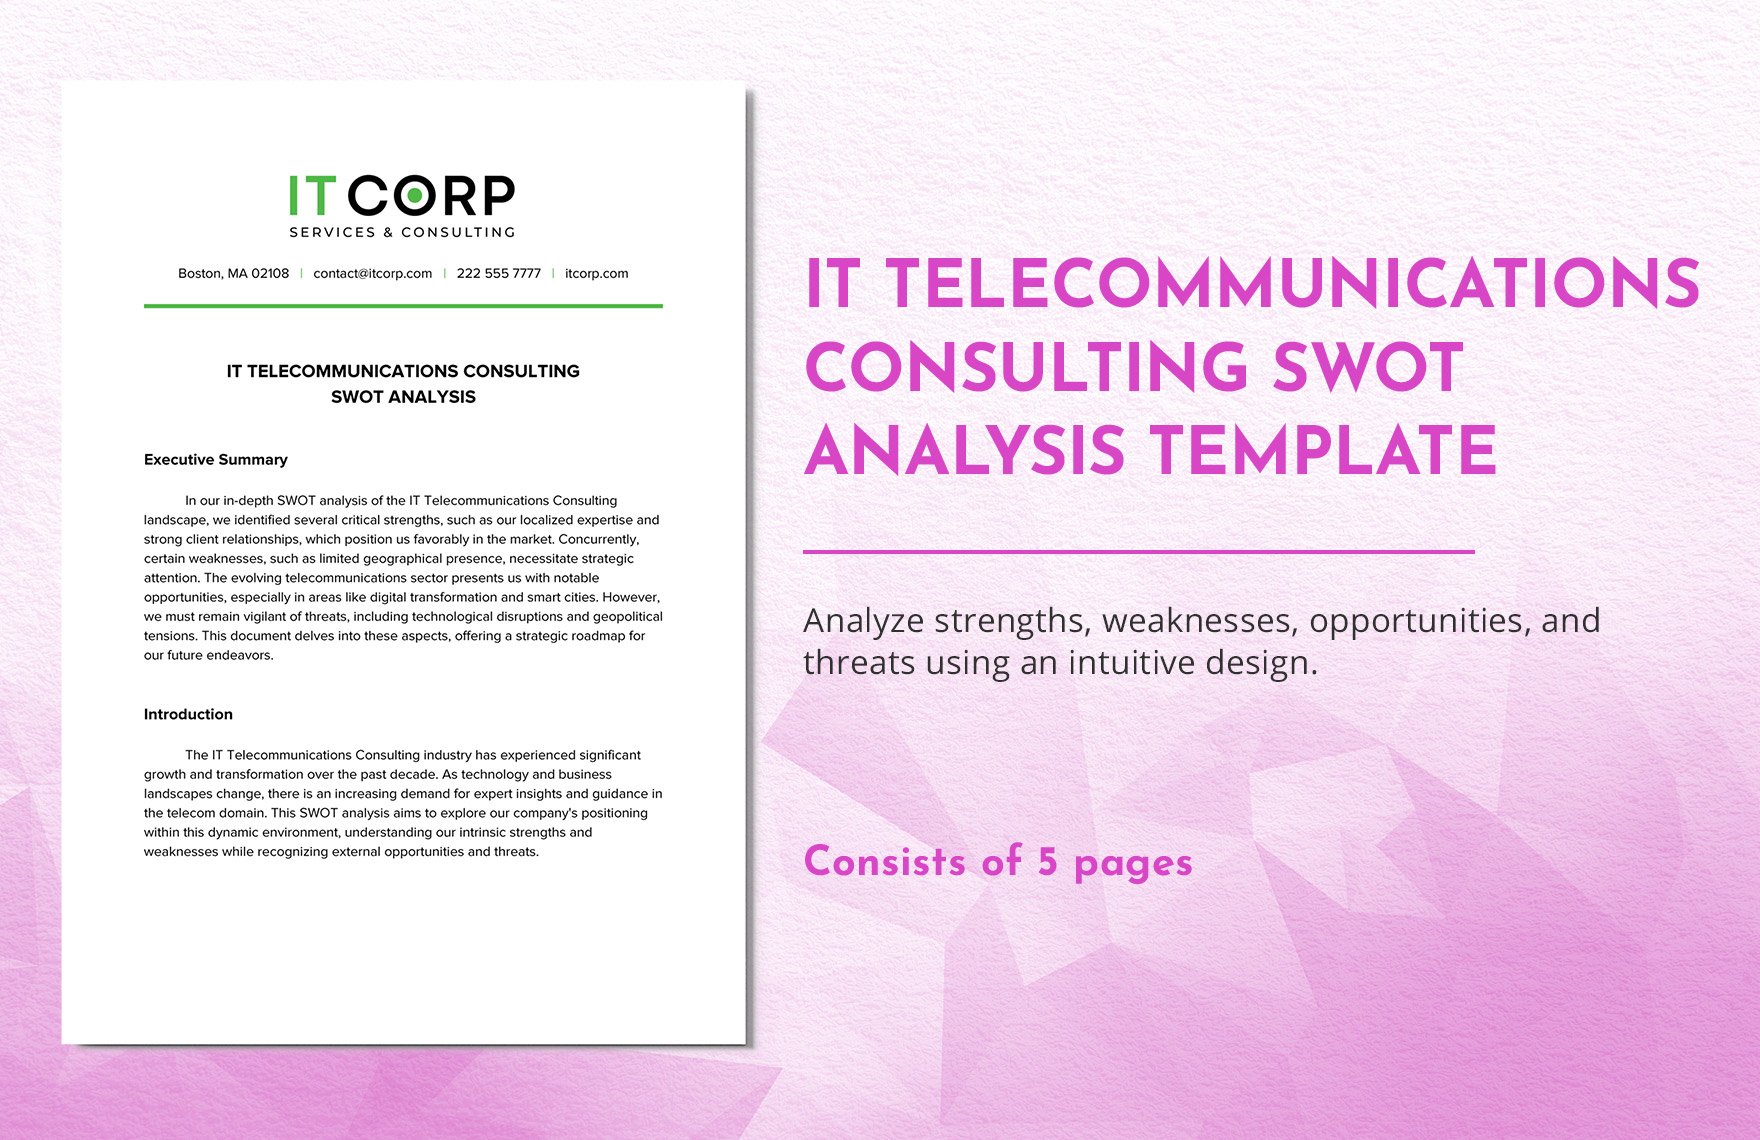 IT Telecommunications Consulting SWOT Analysis Template in Word, Google Docs, PDF